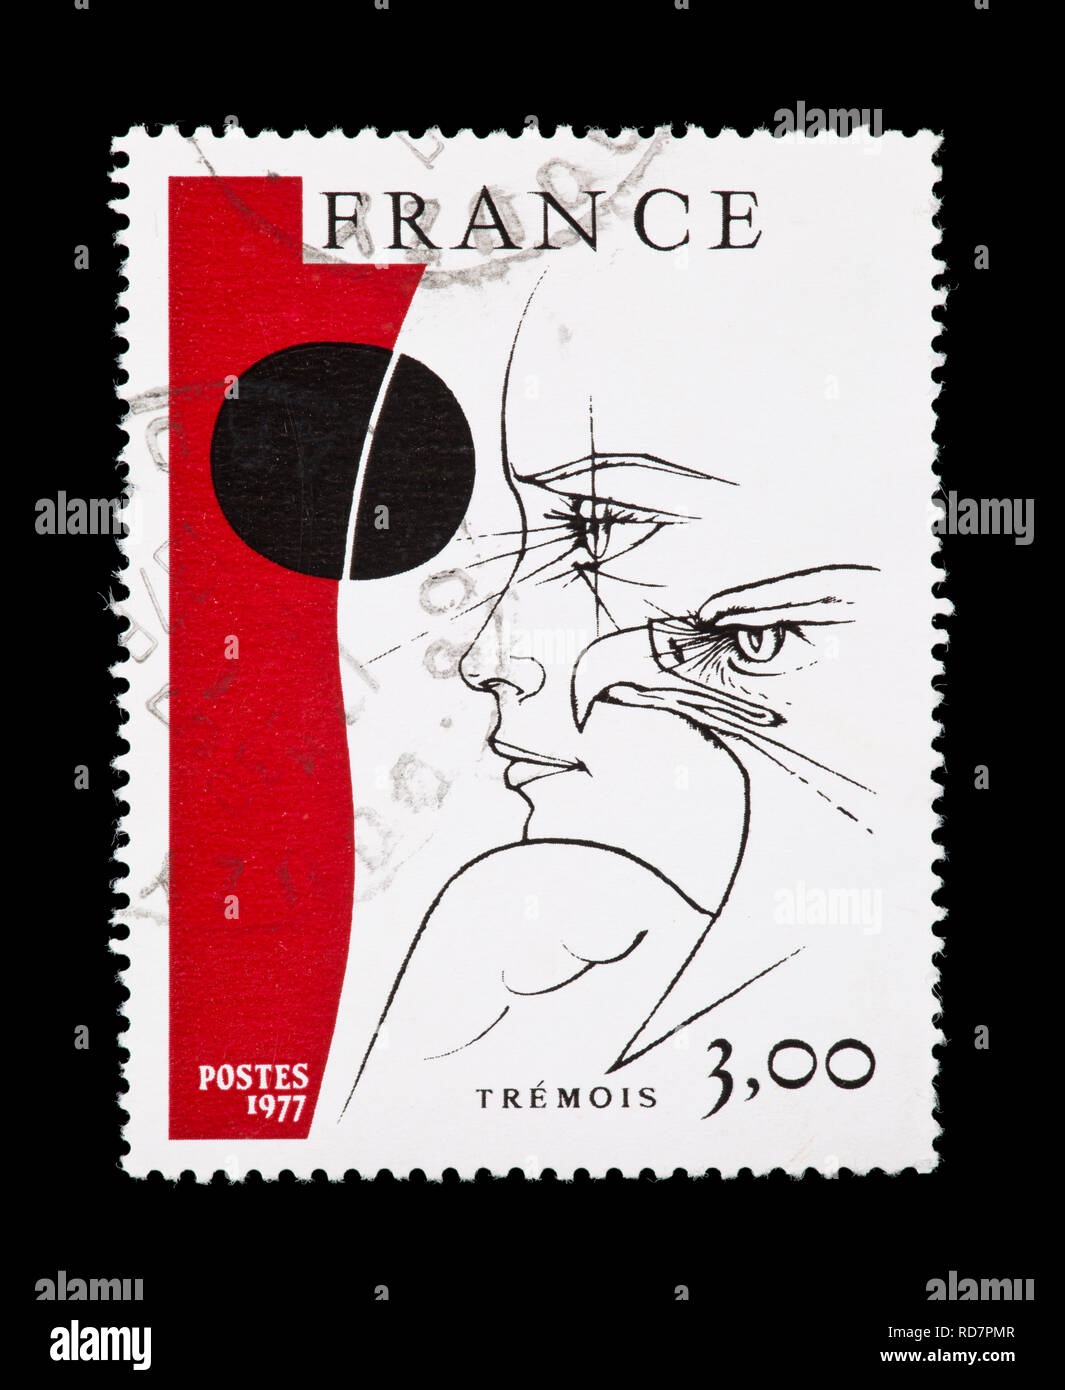 Postage stamp from France depicting  the Pierre-Yves Tremois art 'Head and Eagle' Stock Photo